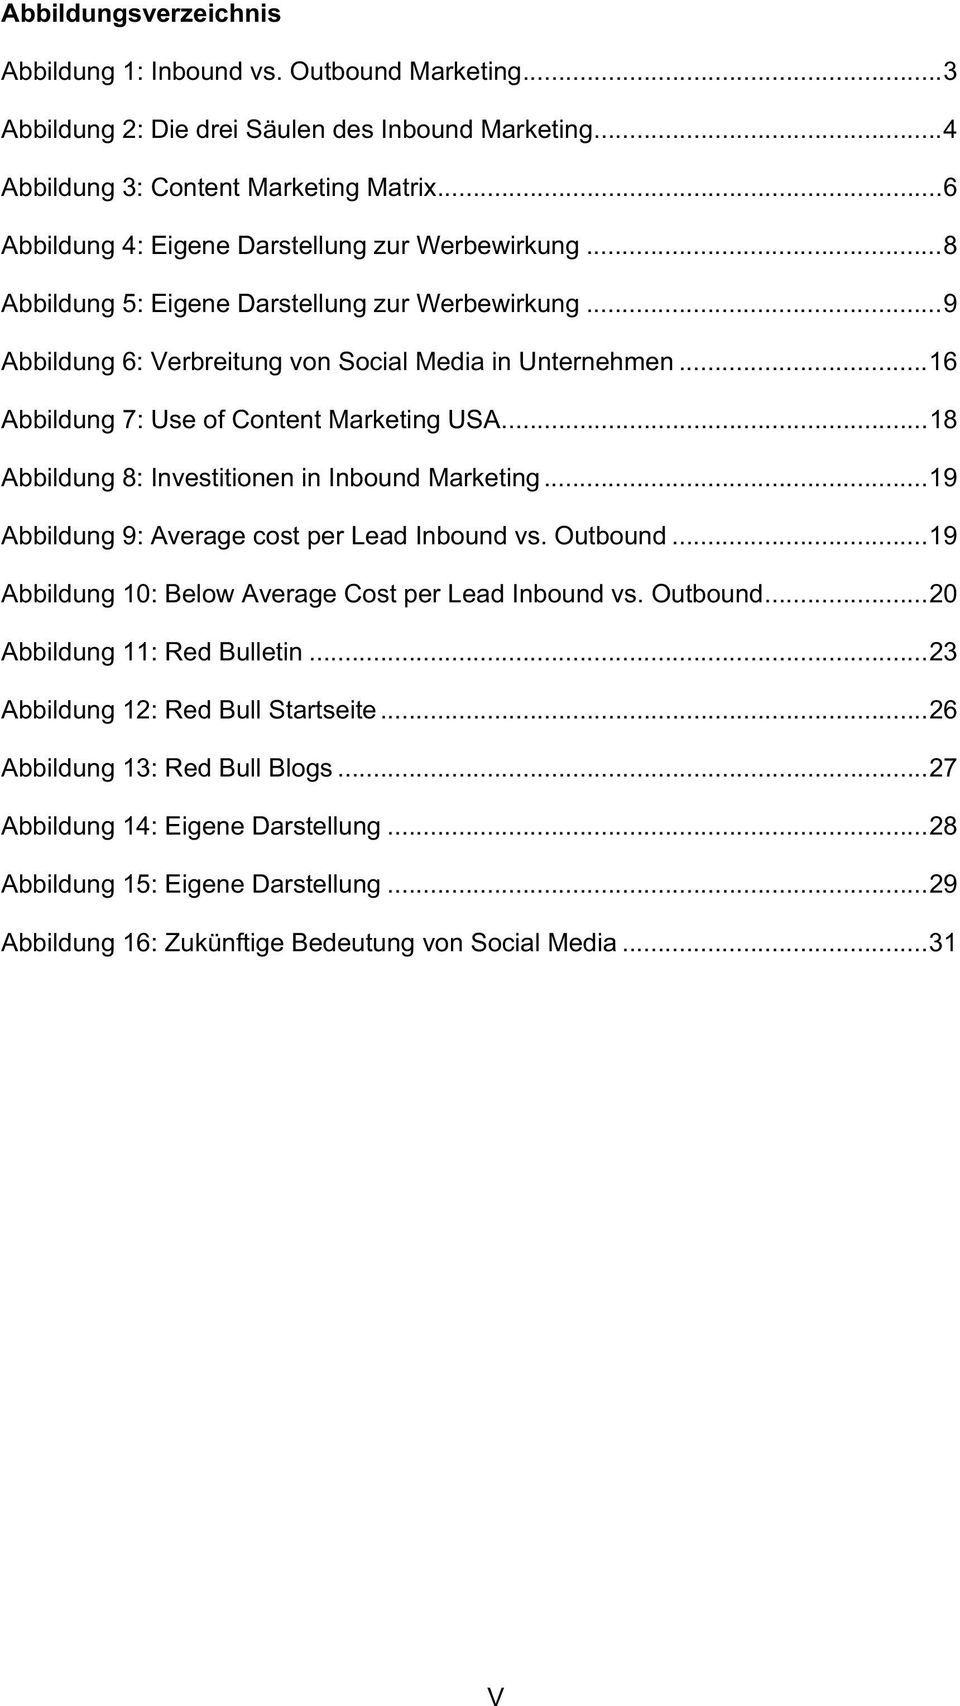 .. 16 Abbildung 7: Use of Content Marketing USA... 18 Abbildung 8: Investitionen in Inbound Marketing... 19 Abbildung 9: Average cost per Lead Inbound vs. Outbound.